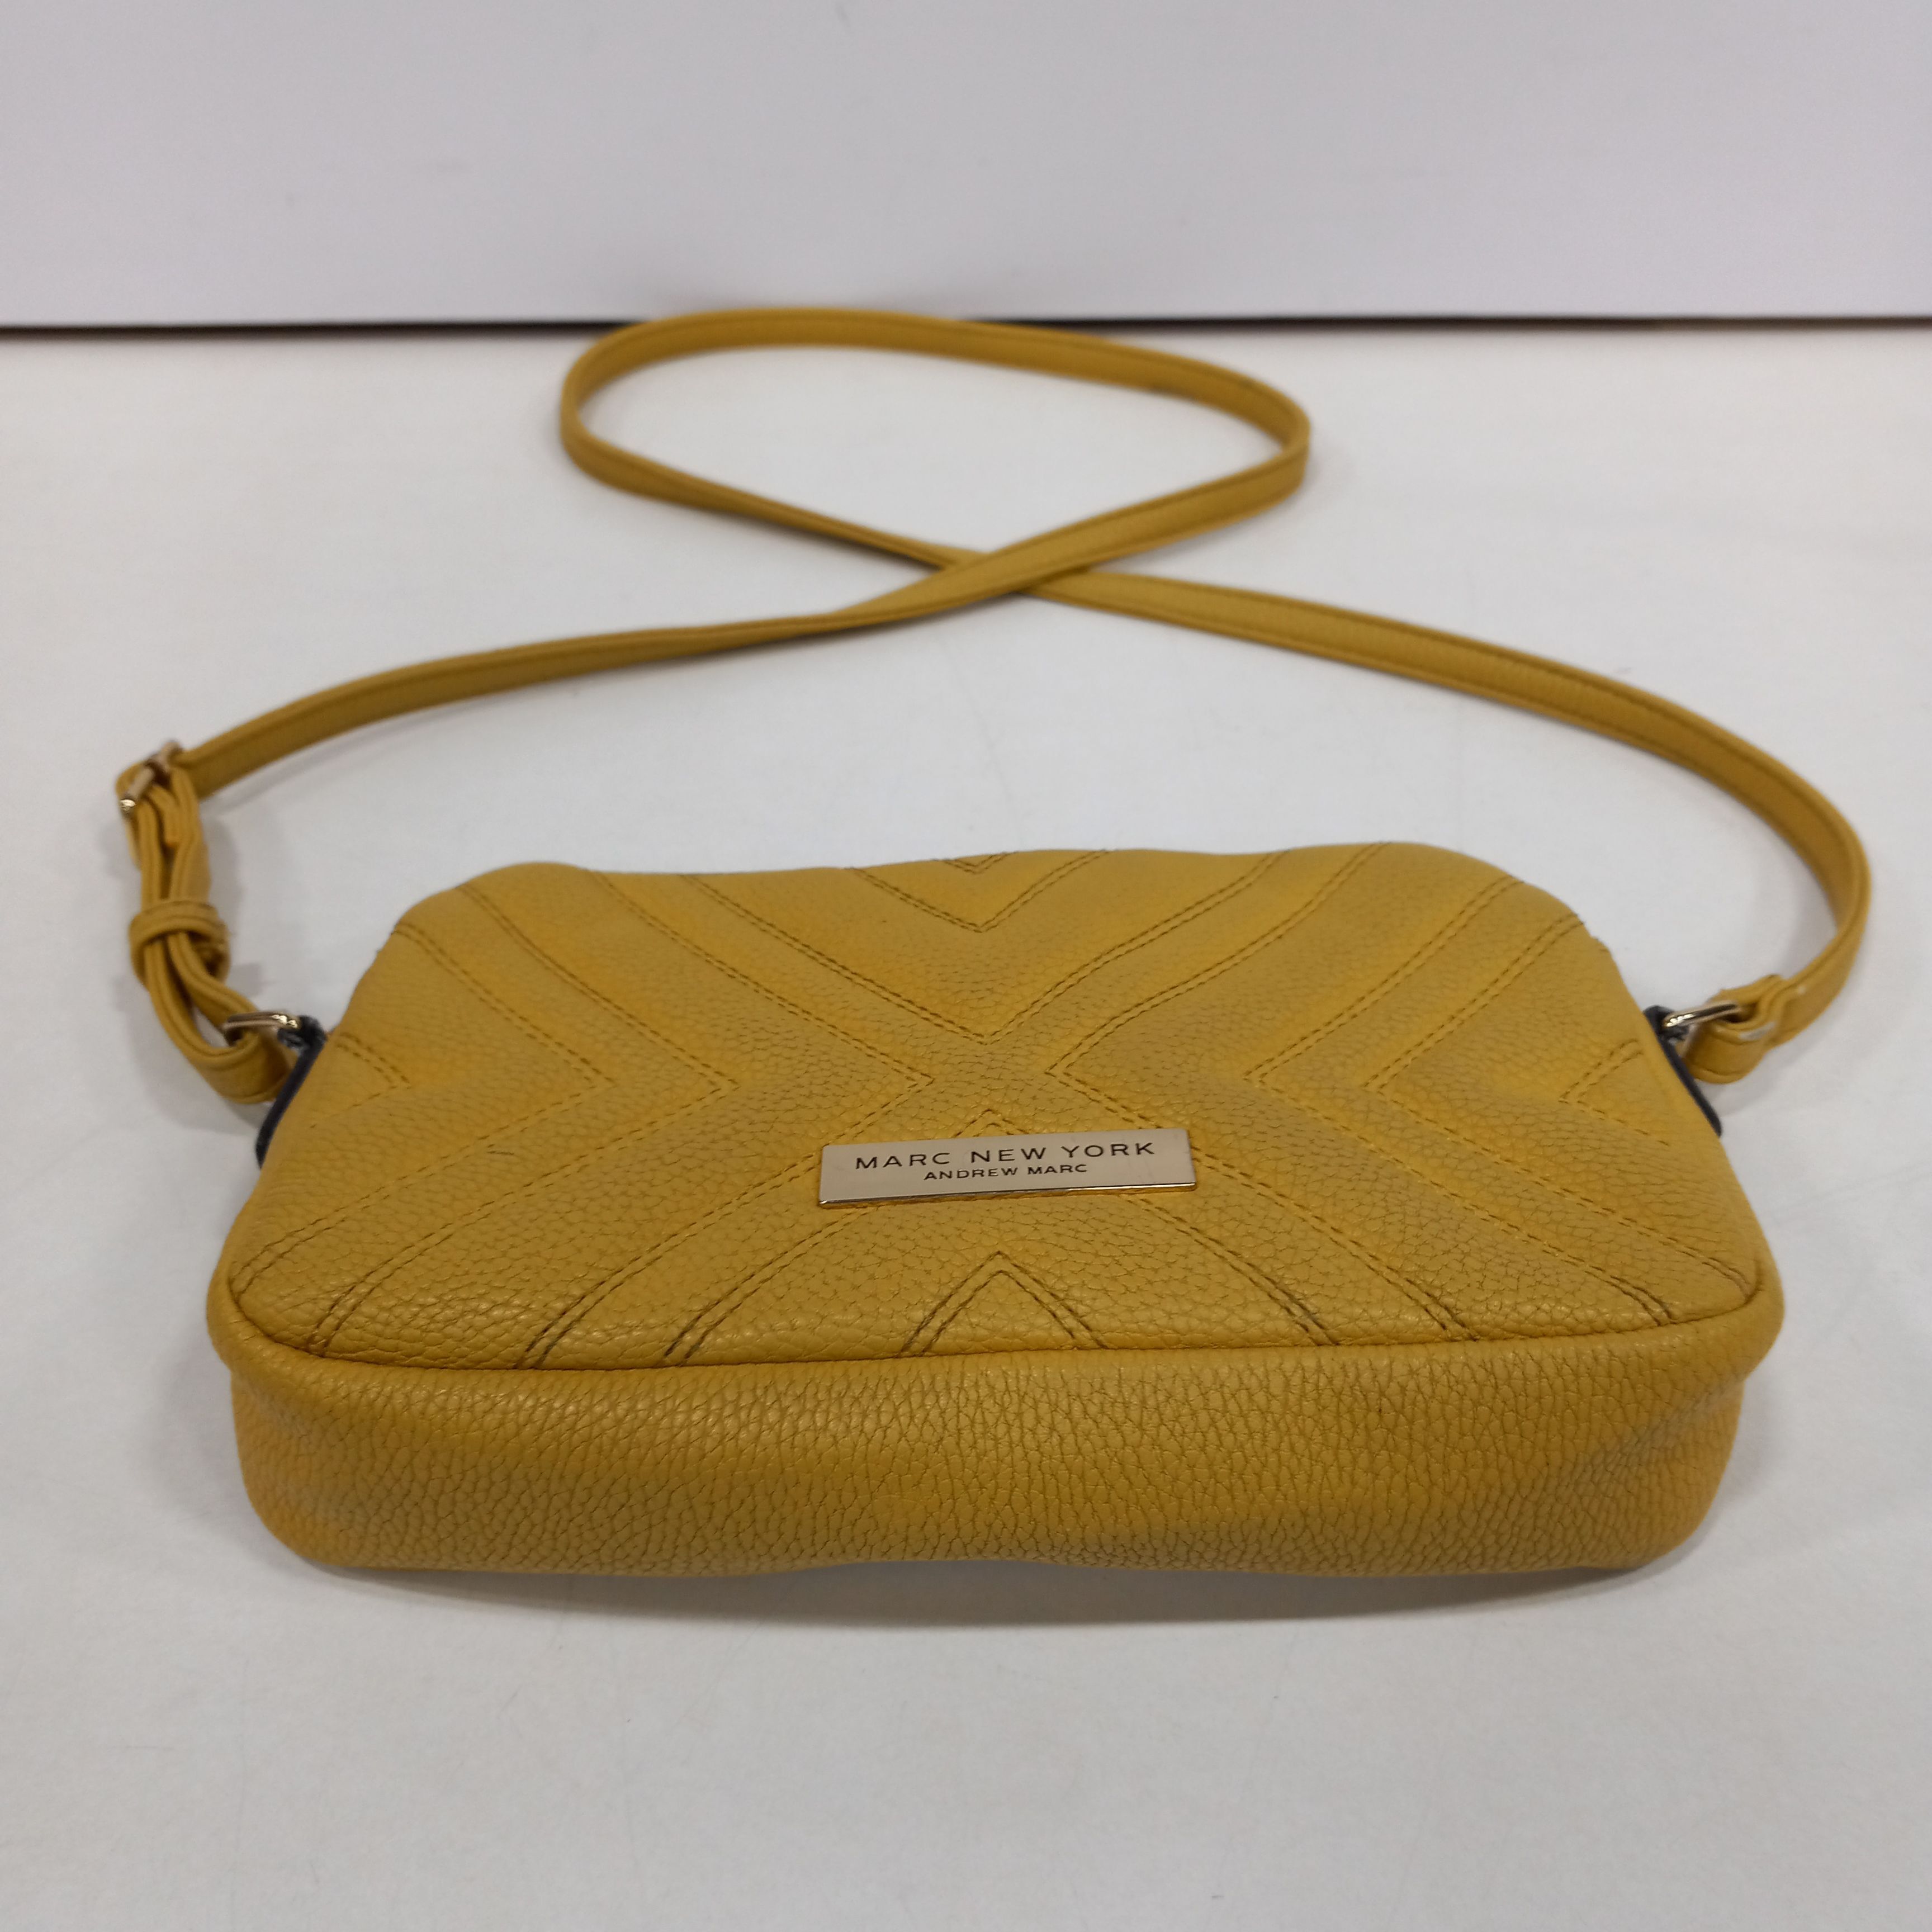 Marc Jacobs The Box Yellow Leather Bag | Yellow leather bag, Yellow  leather, Marc jacobs